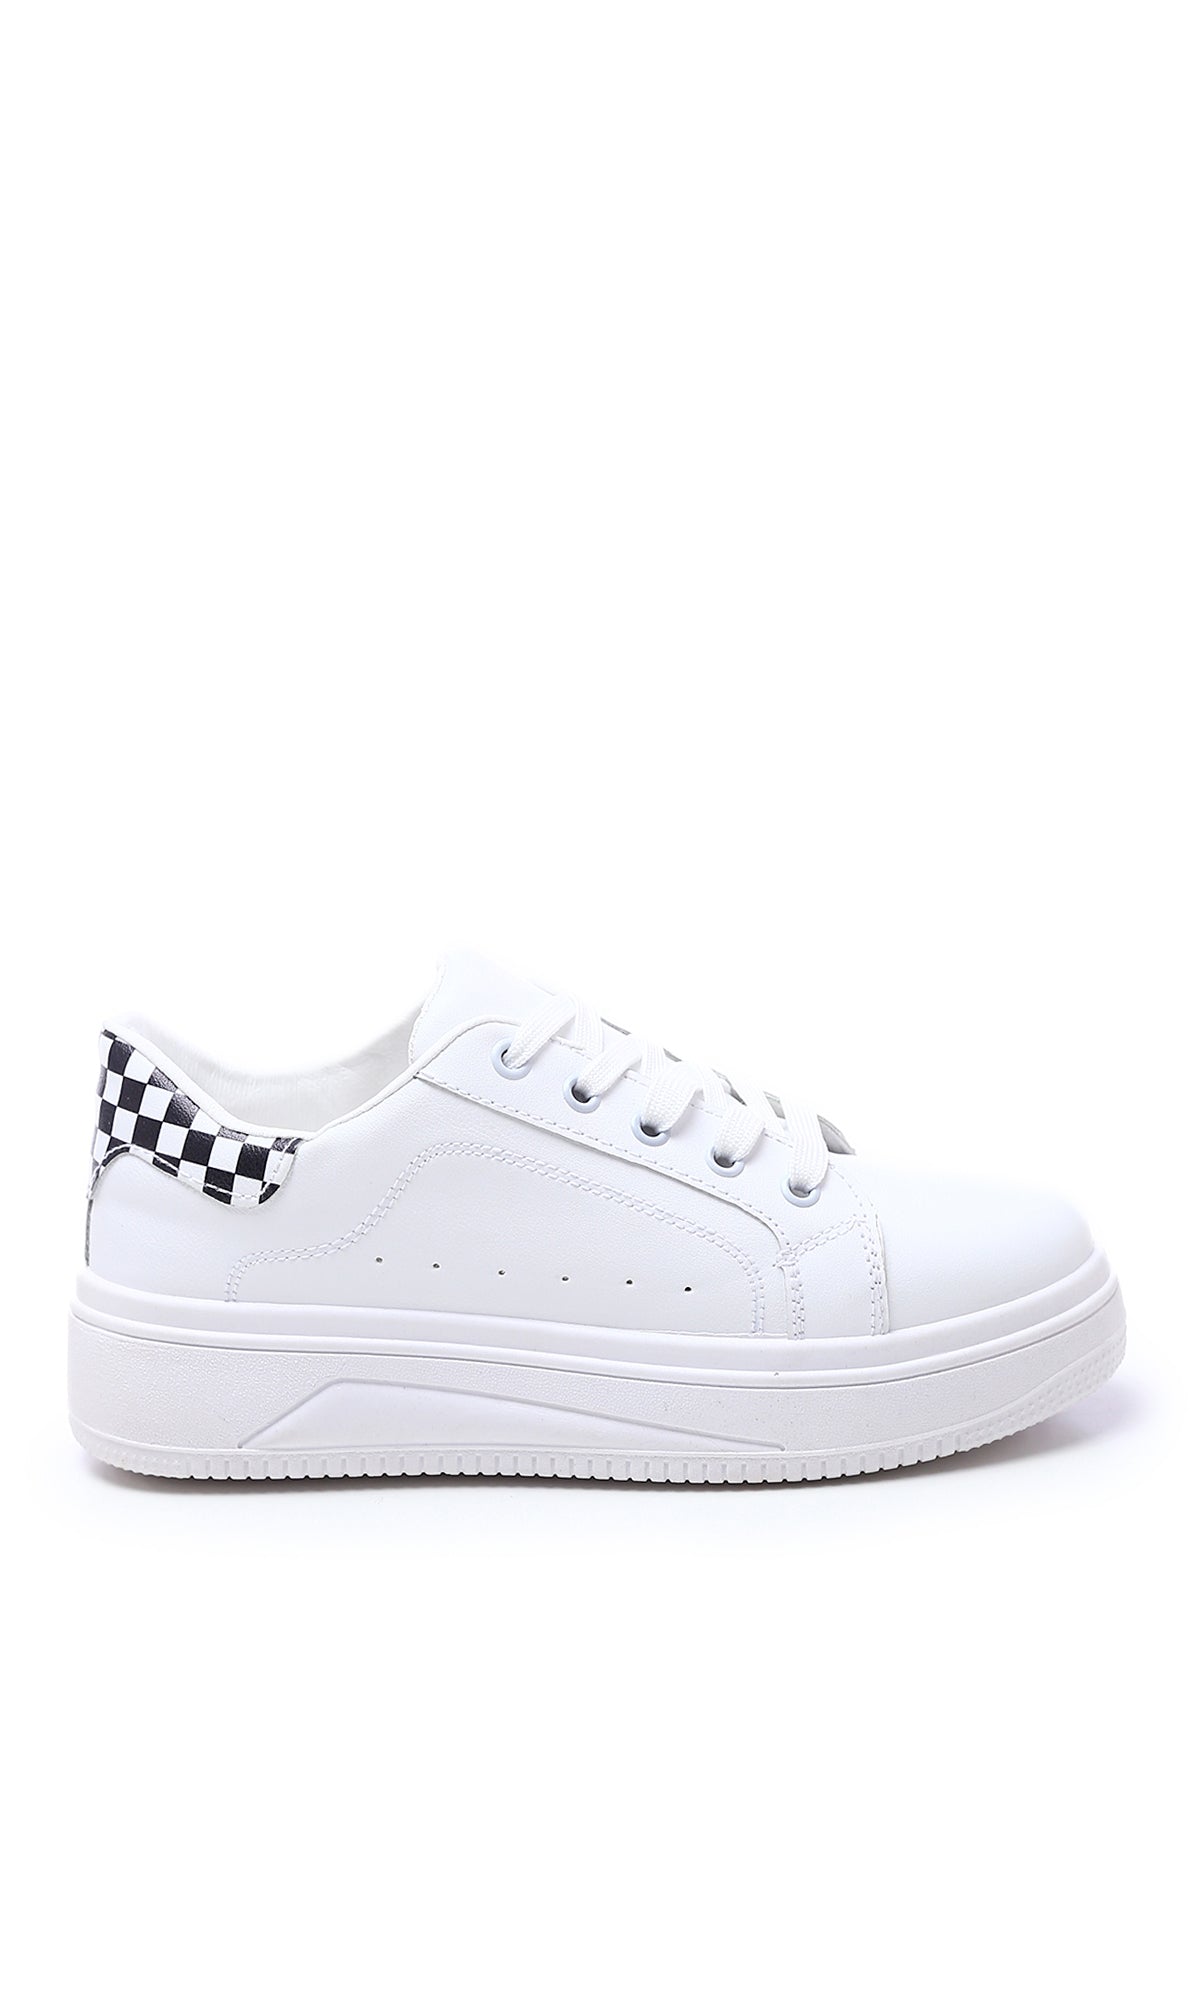 O177887 Round Toecap Sneakers With Checkered Back - White